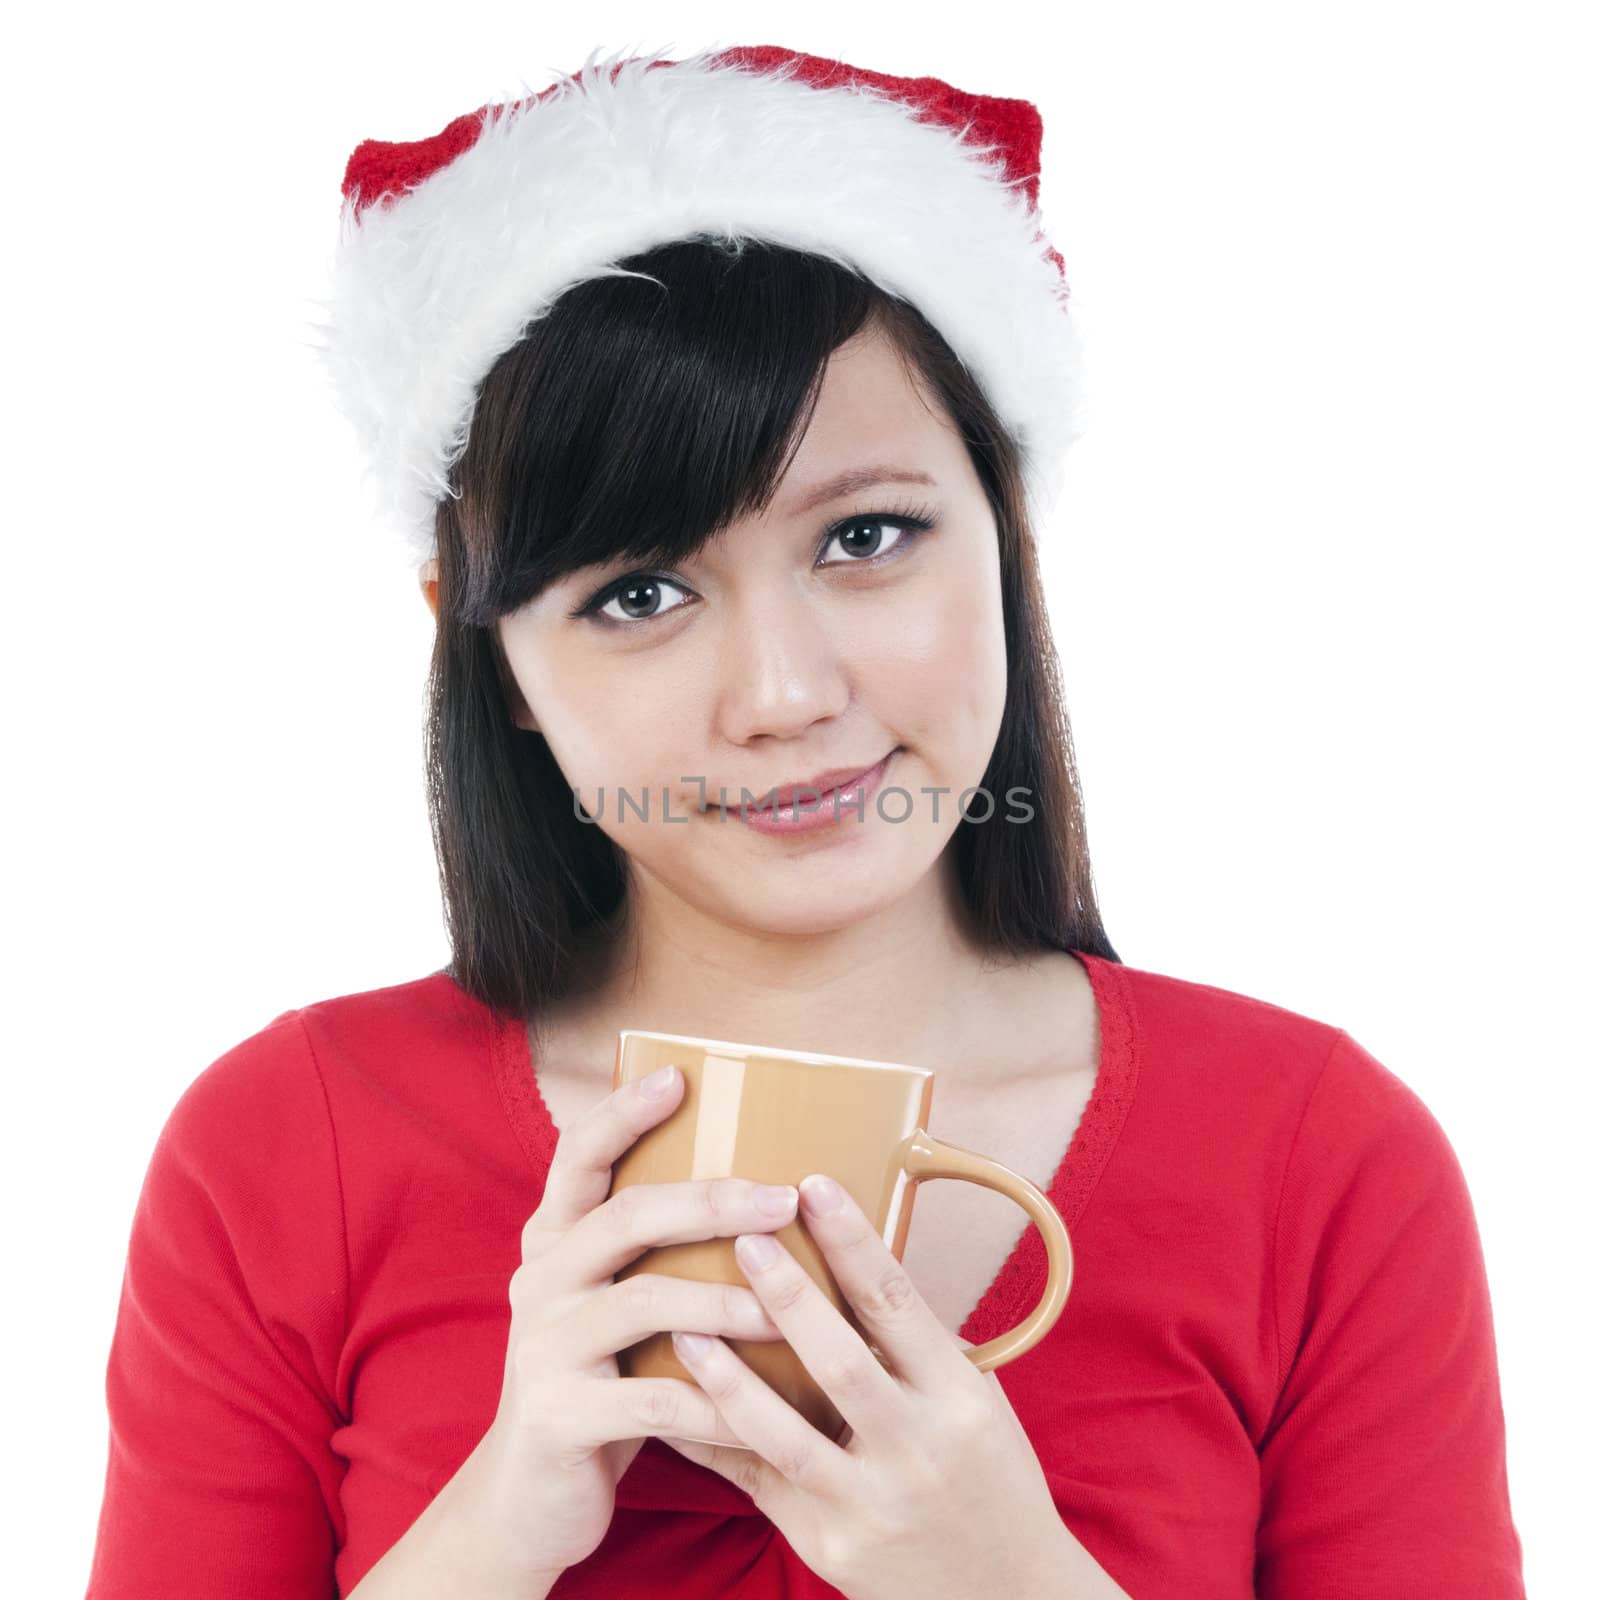 Portrait of a cute Christmas woman holding a cup, isolated on white background